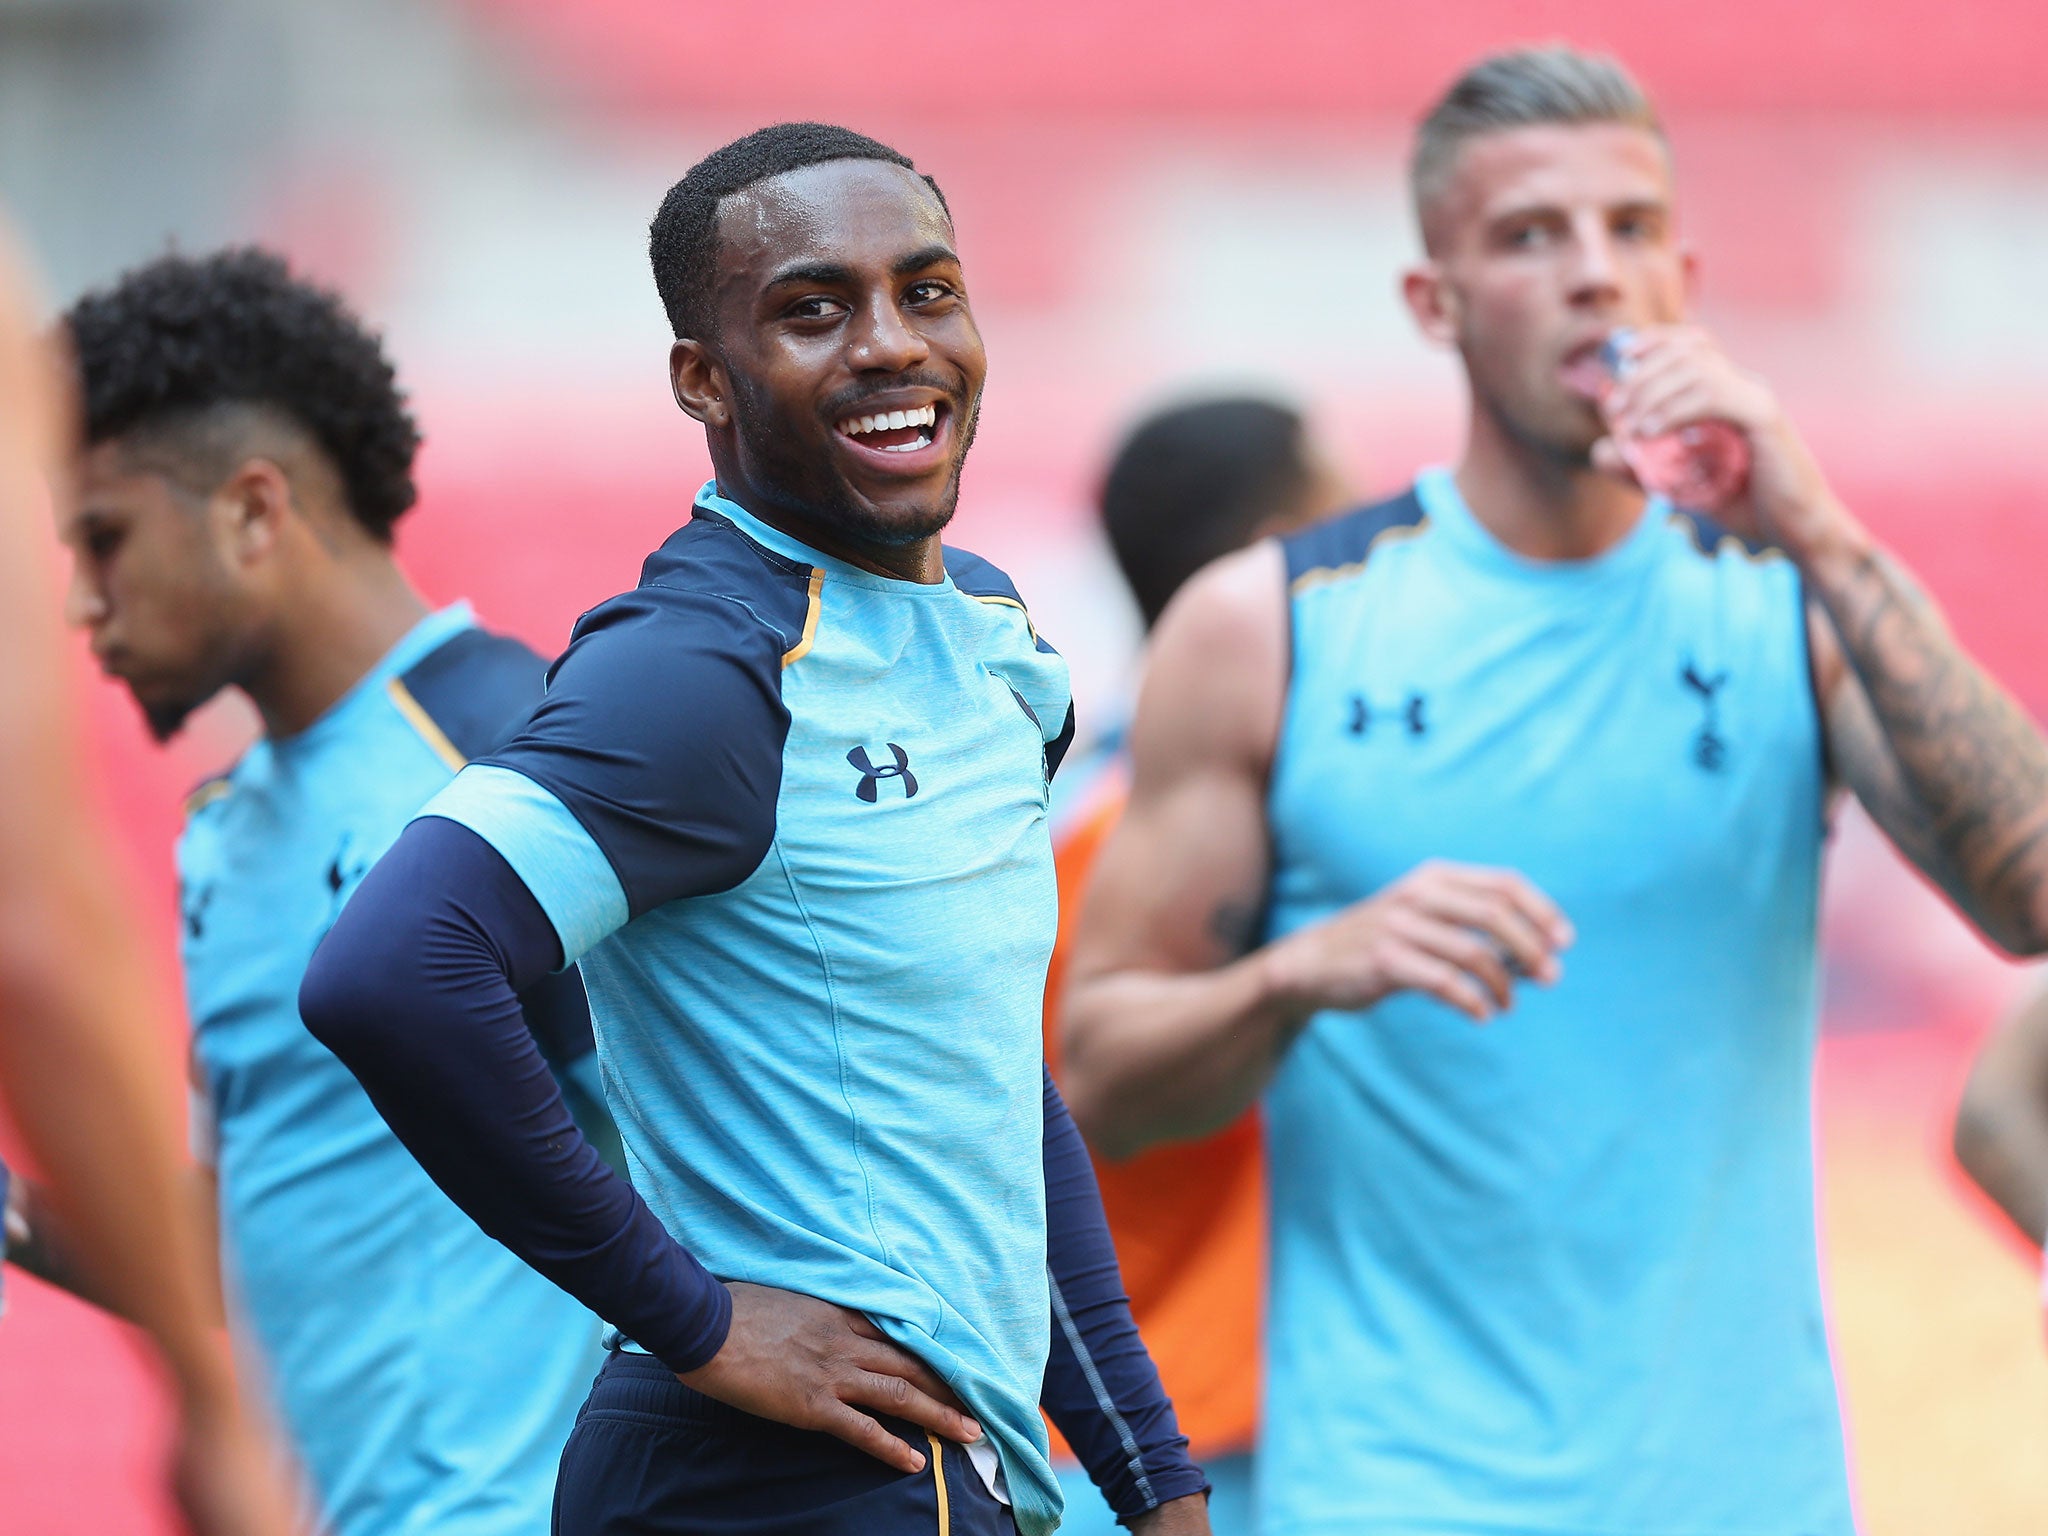 Danny Rose in training at Wembley ahead of Wednesday night's Champions League fixture